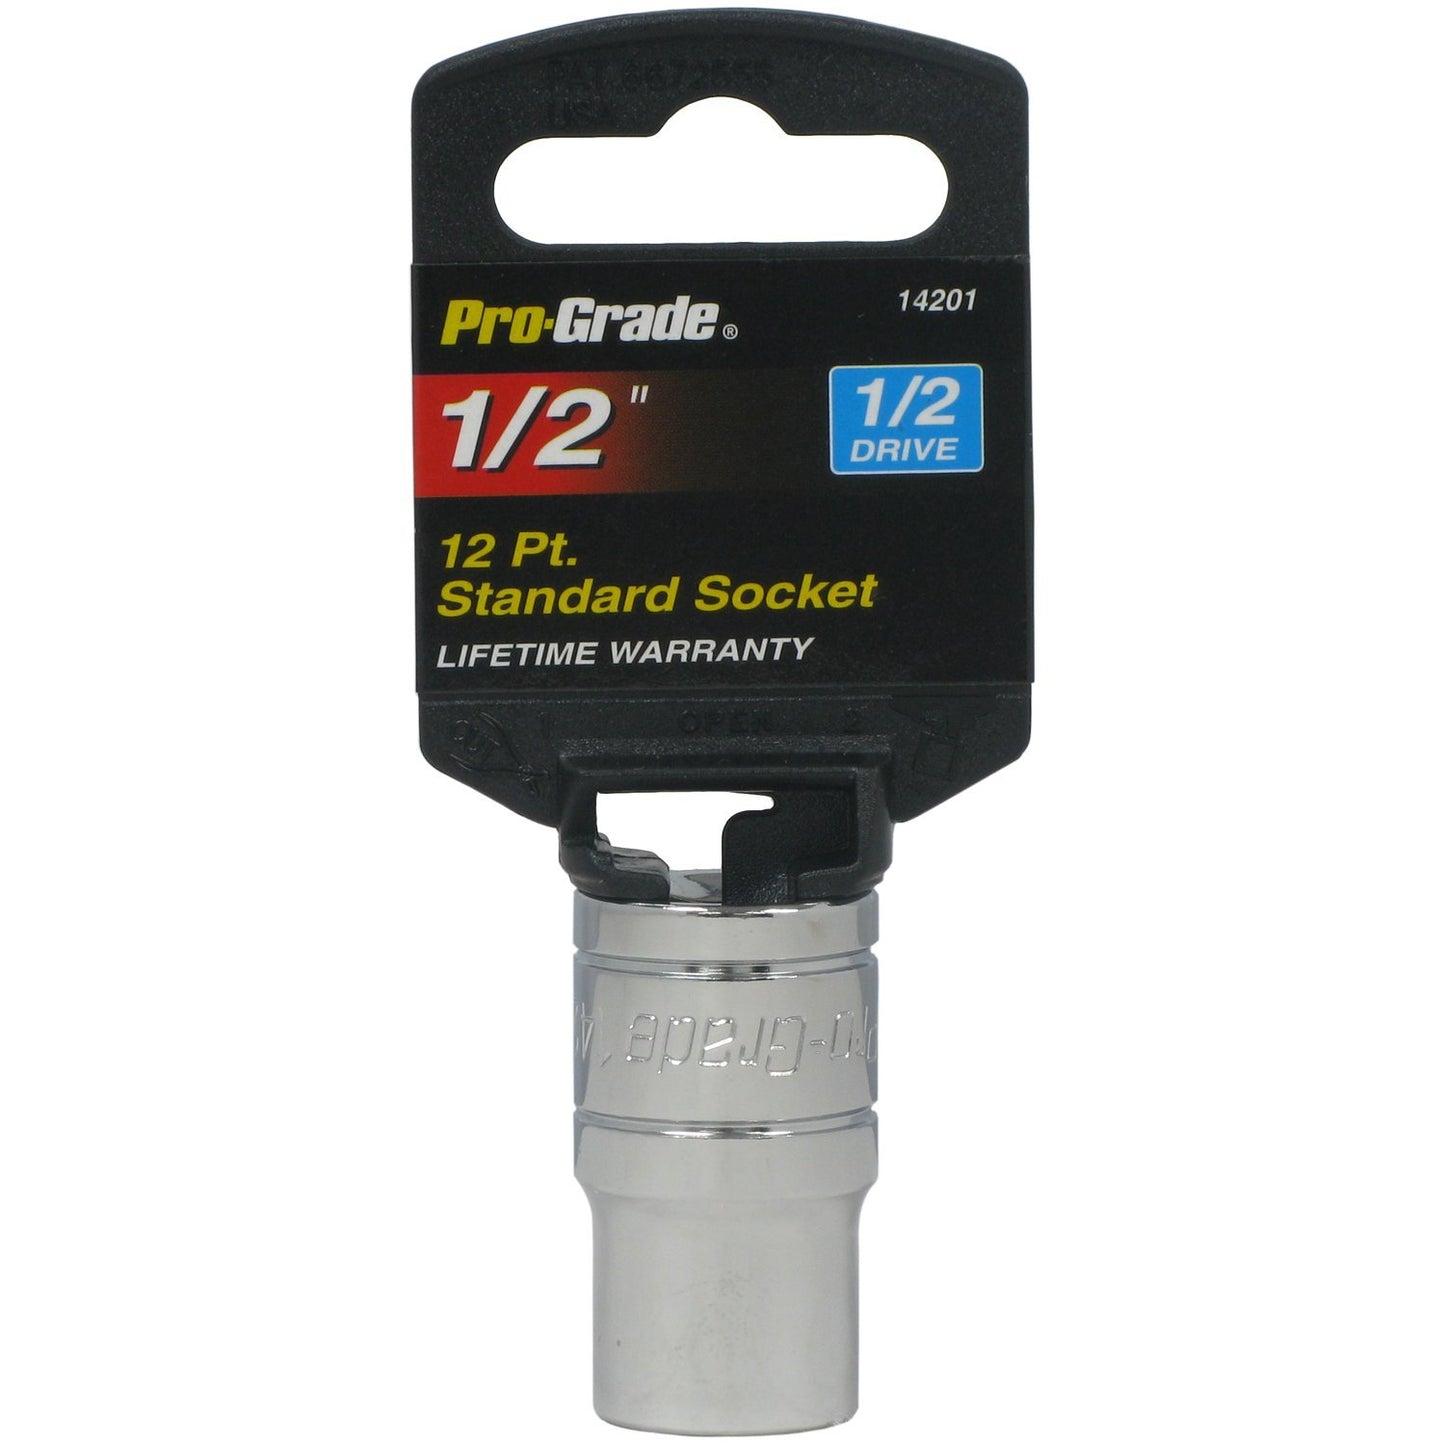 Choose Your Size - 1/2" Drive Standard Shallow Socket from 5/8 to 1-1/8"